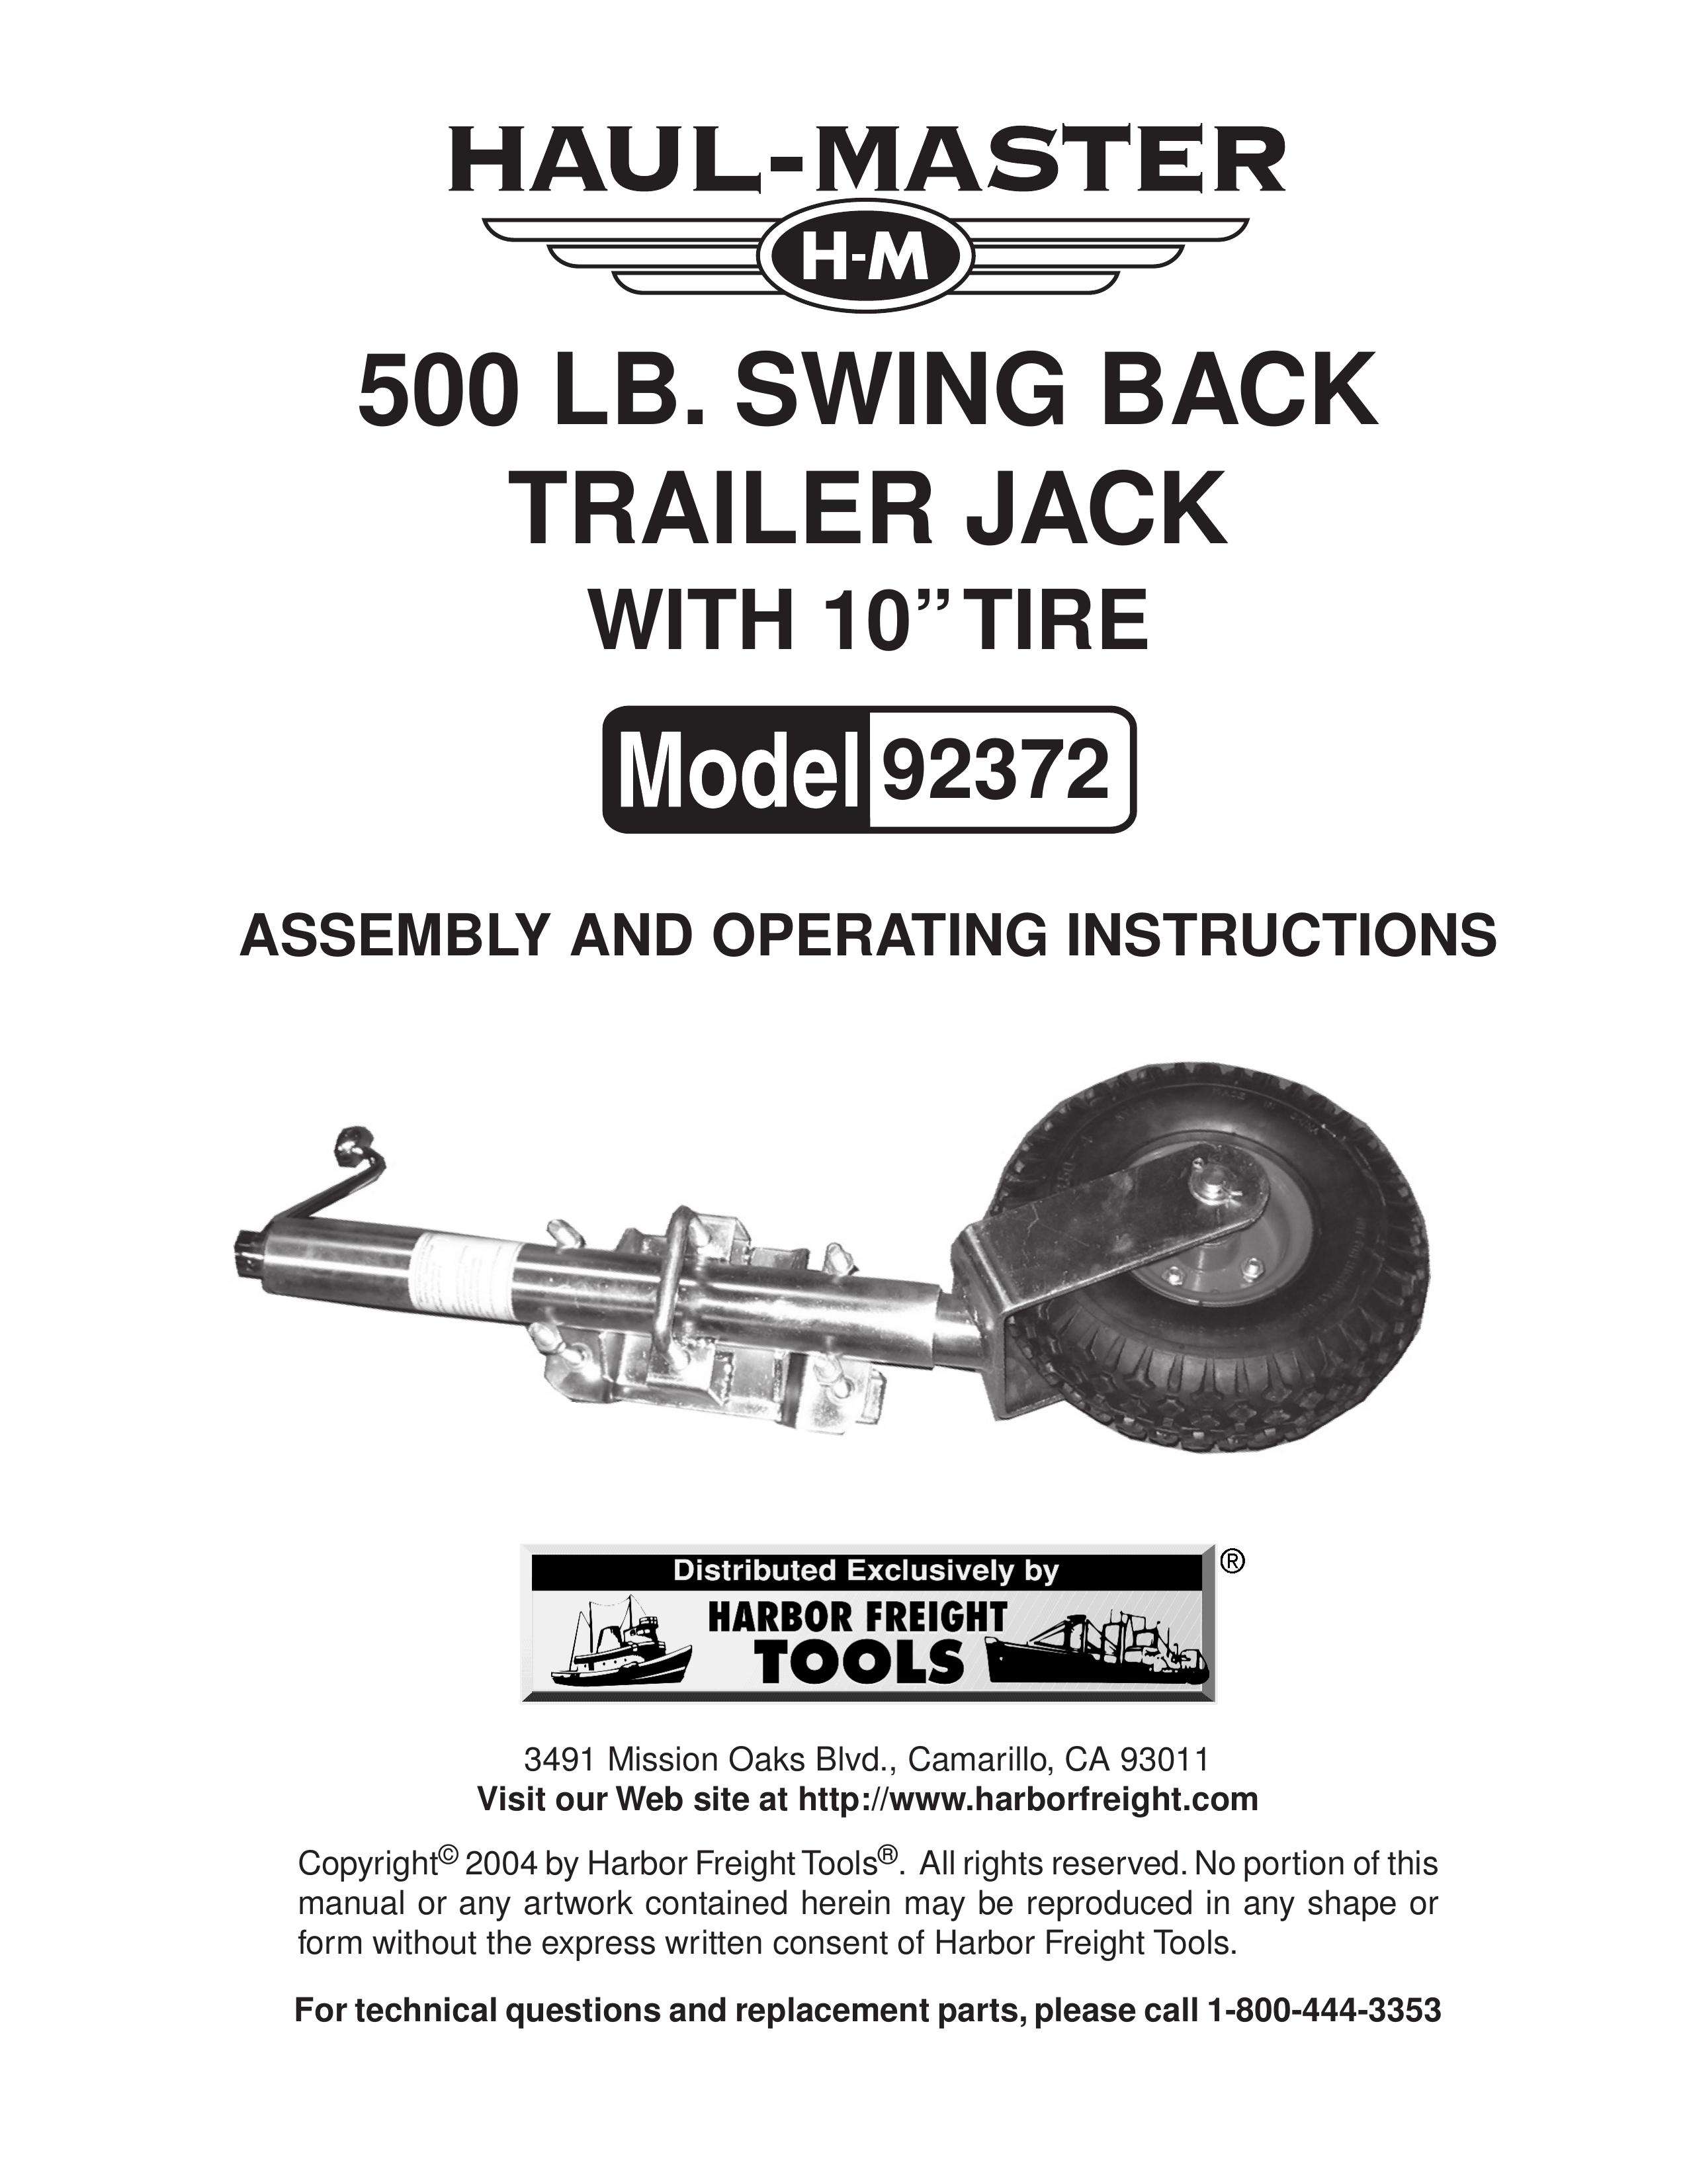 Harbor Freight Tools 92372 Boat Trailer User Manual (Page 1)